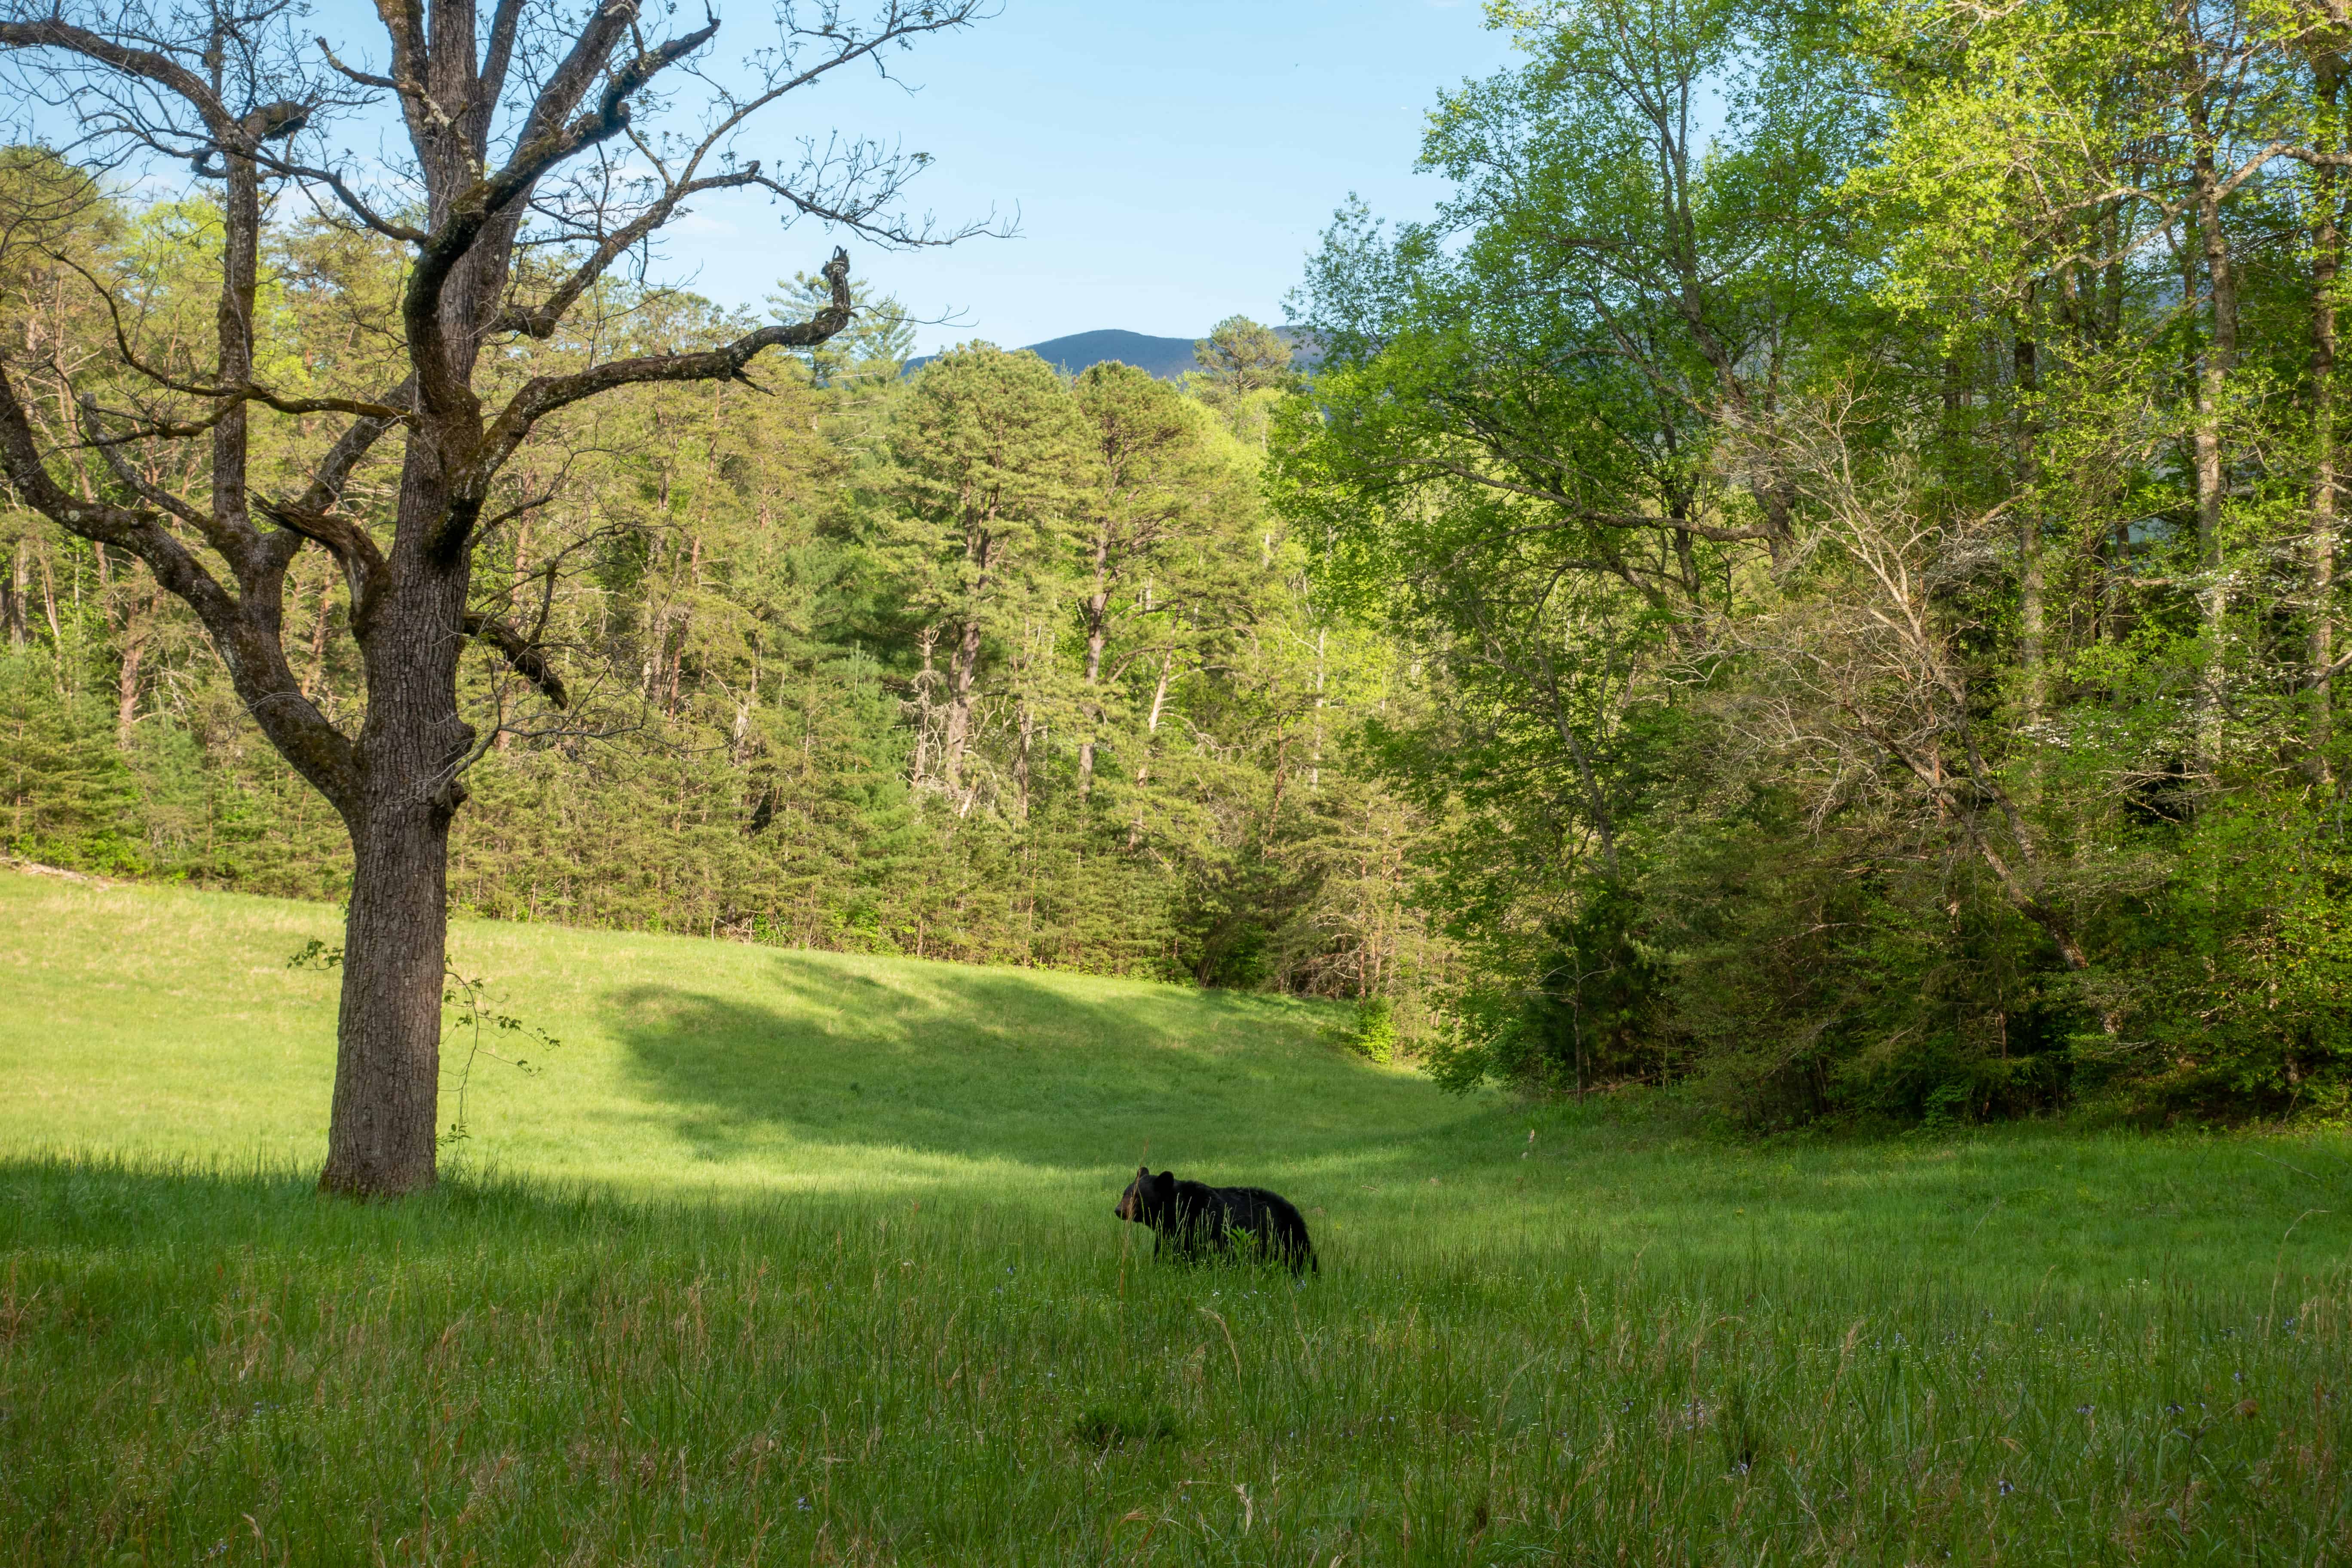 Bear walking around Cades Cove in Great Smoky Mountains National Park